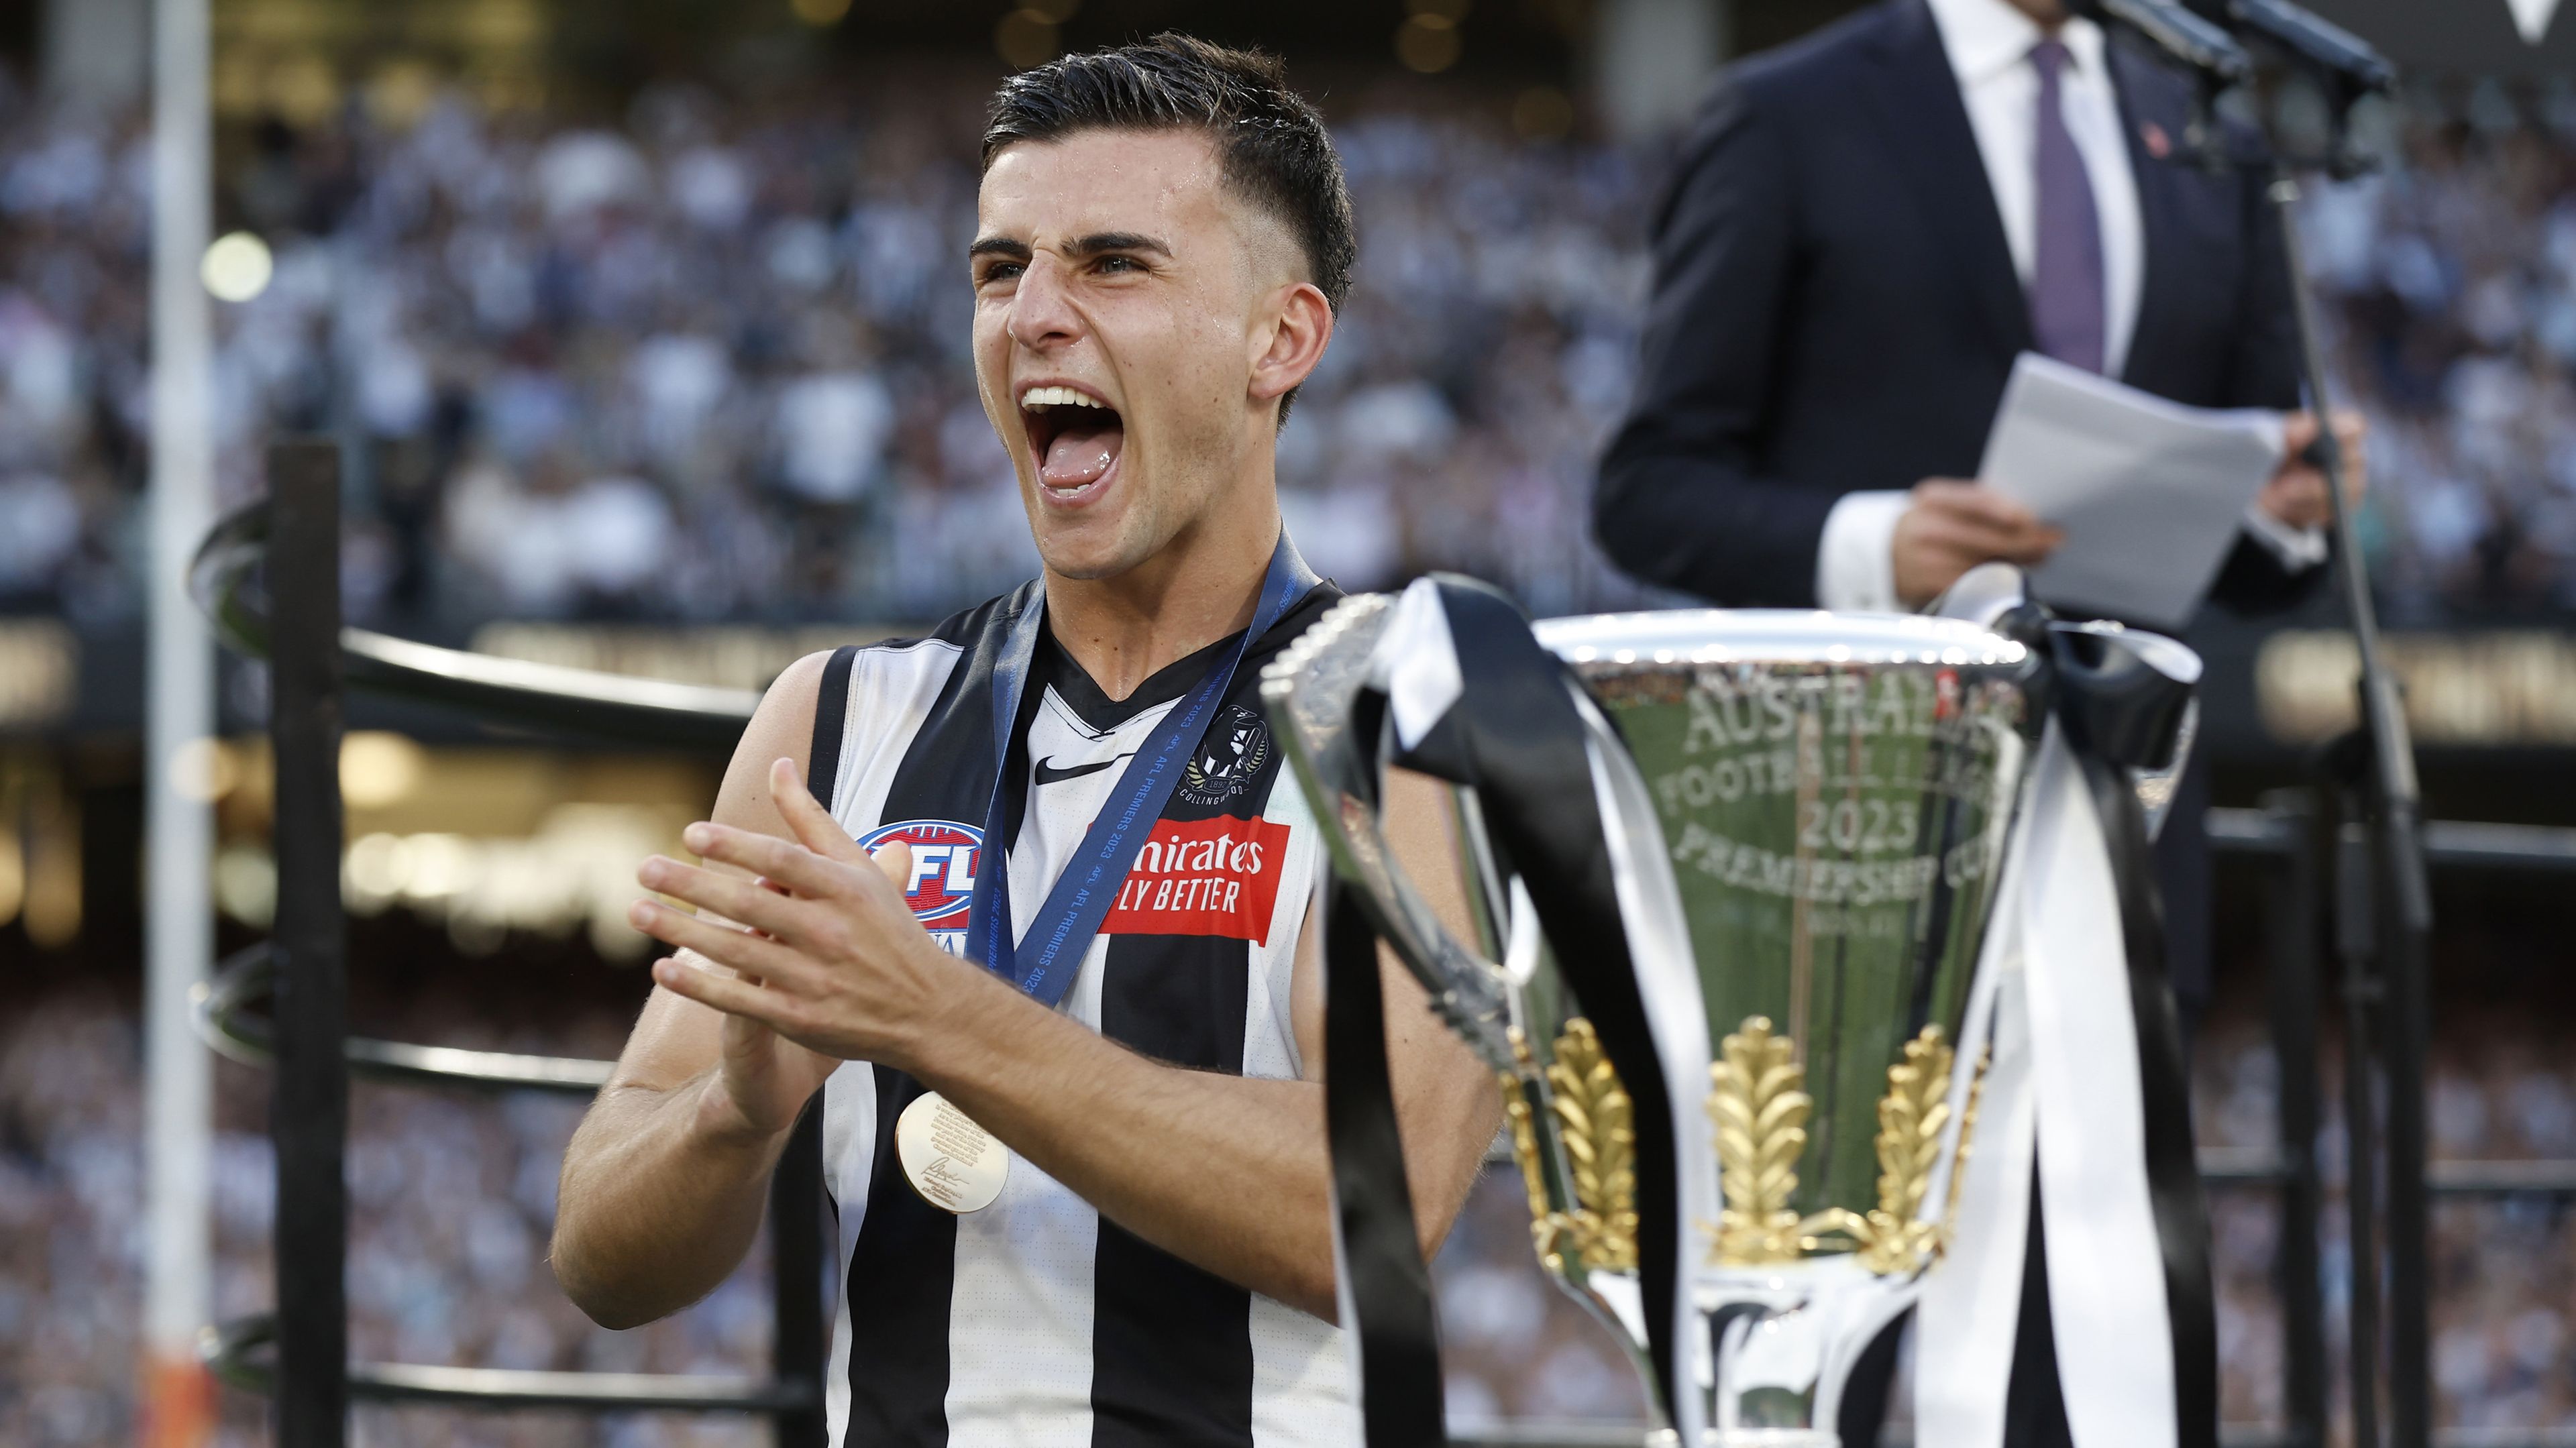 MELBOURNE, AUSTRALIA - SEPTEMBER 30: Nick Daicos of the Magpies celebrates after the 2023 AFL Grand Final match between Collingwood Magpies and Brisbane Lions at Melbourne Cricket Ground, on September 30, 2023, in Melbourne, Australia. (Photo by Darrian Traynor/AFL Photos/via Getty Images)